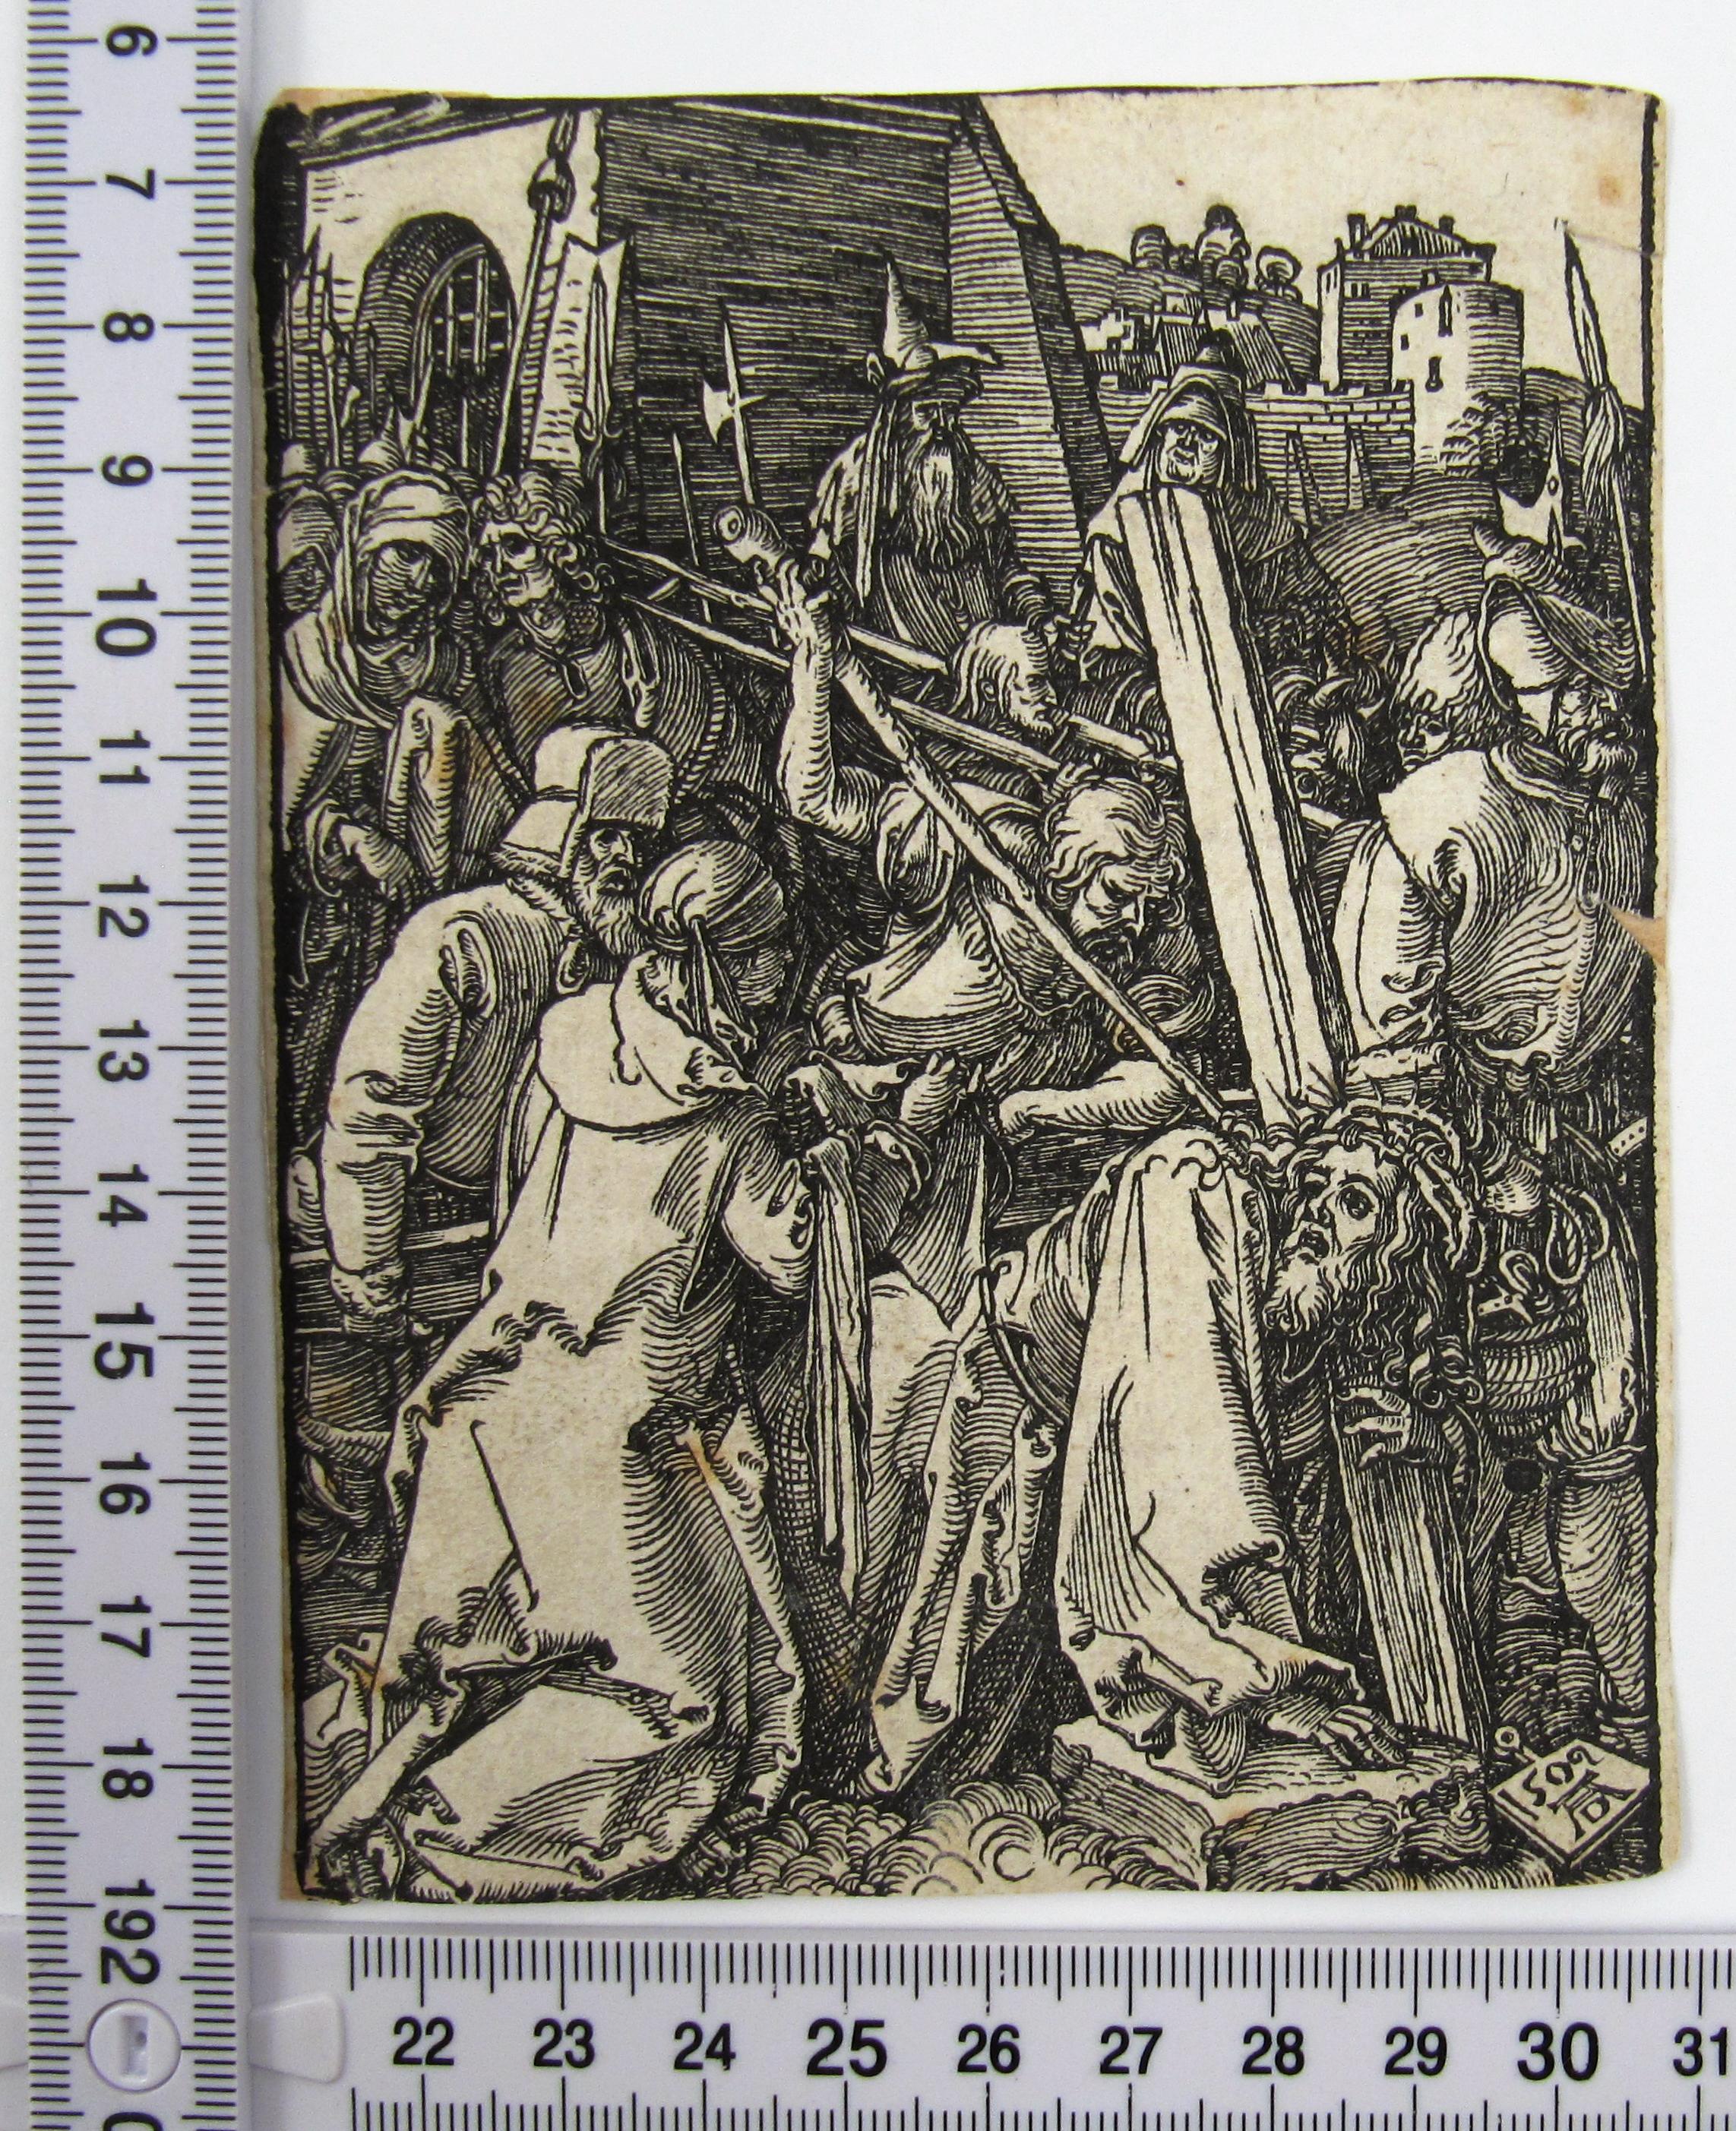 Christ Carrying the Cross - Small Passion - Woodcut - 16thC Proof Impression - Black Figurative Print by Albrecht Dürer